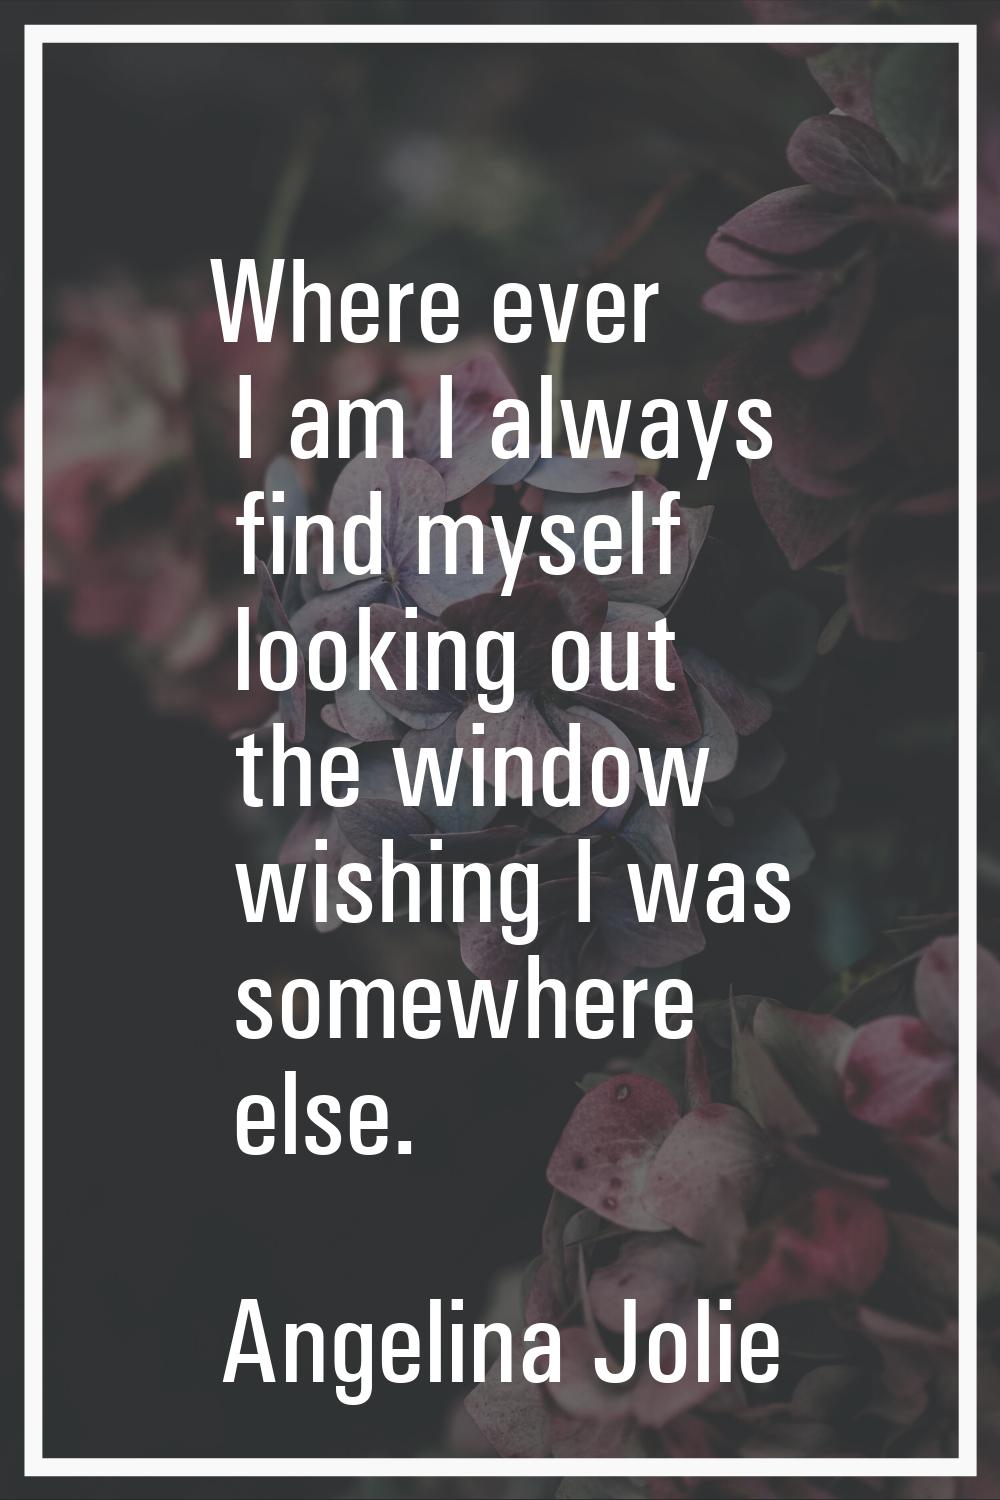 Where ever I am I always find myself looking out the window wishing I was somewhere else.